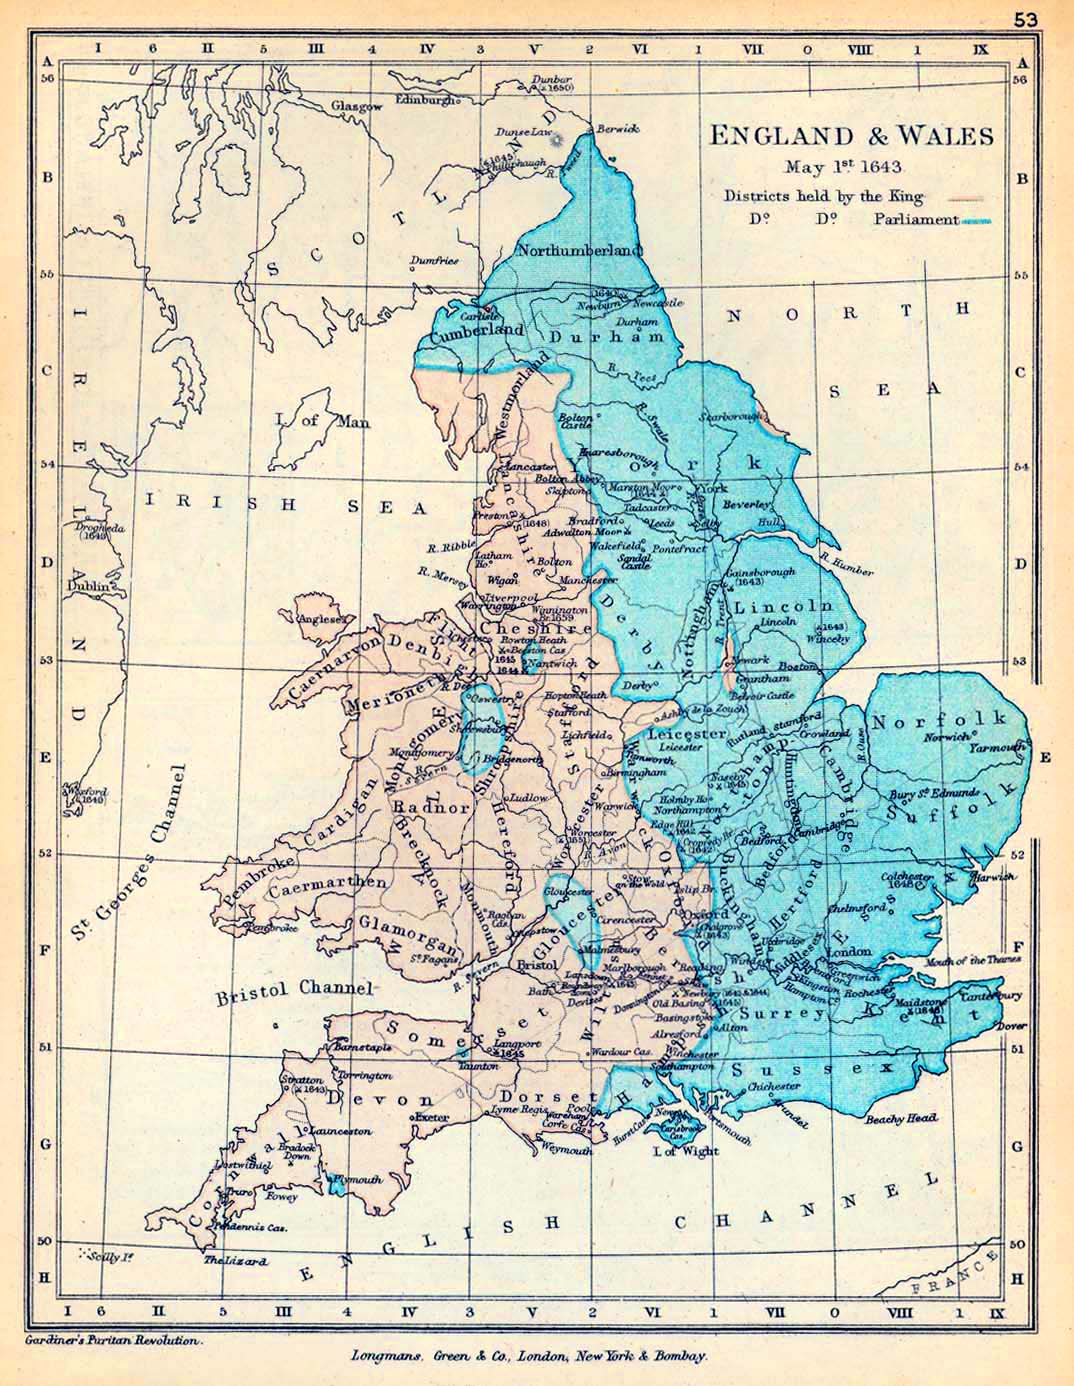 Map of England and Wales May 1, 1643